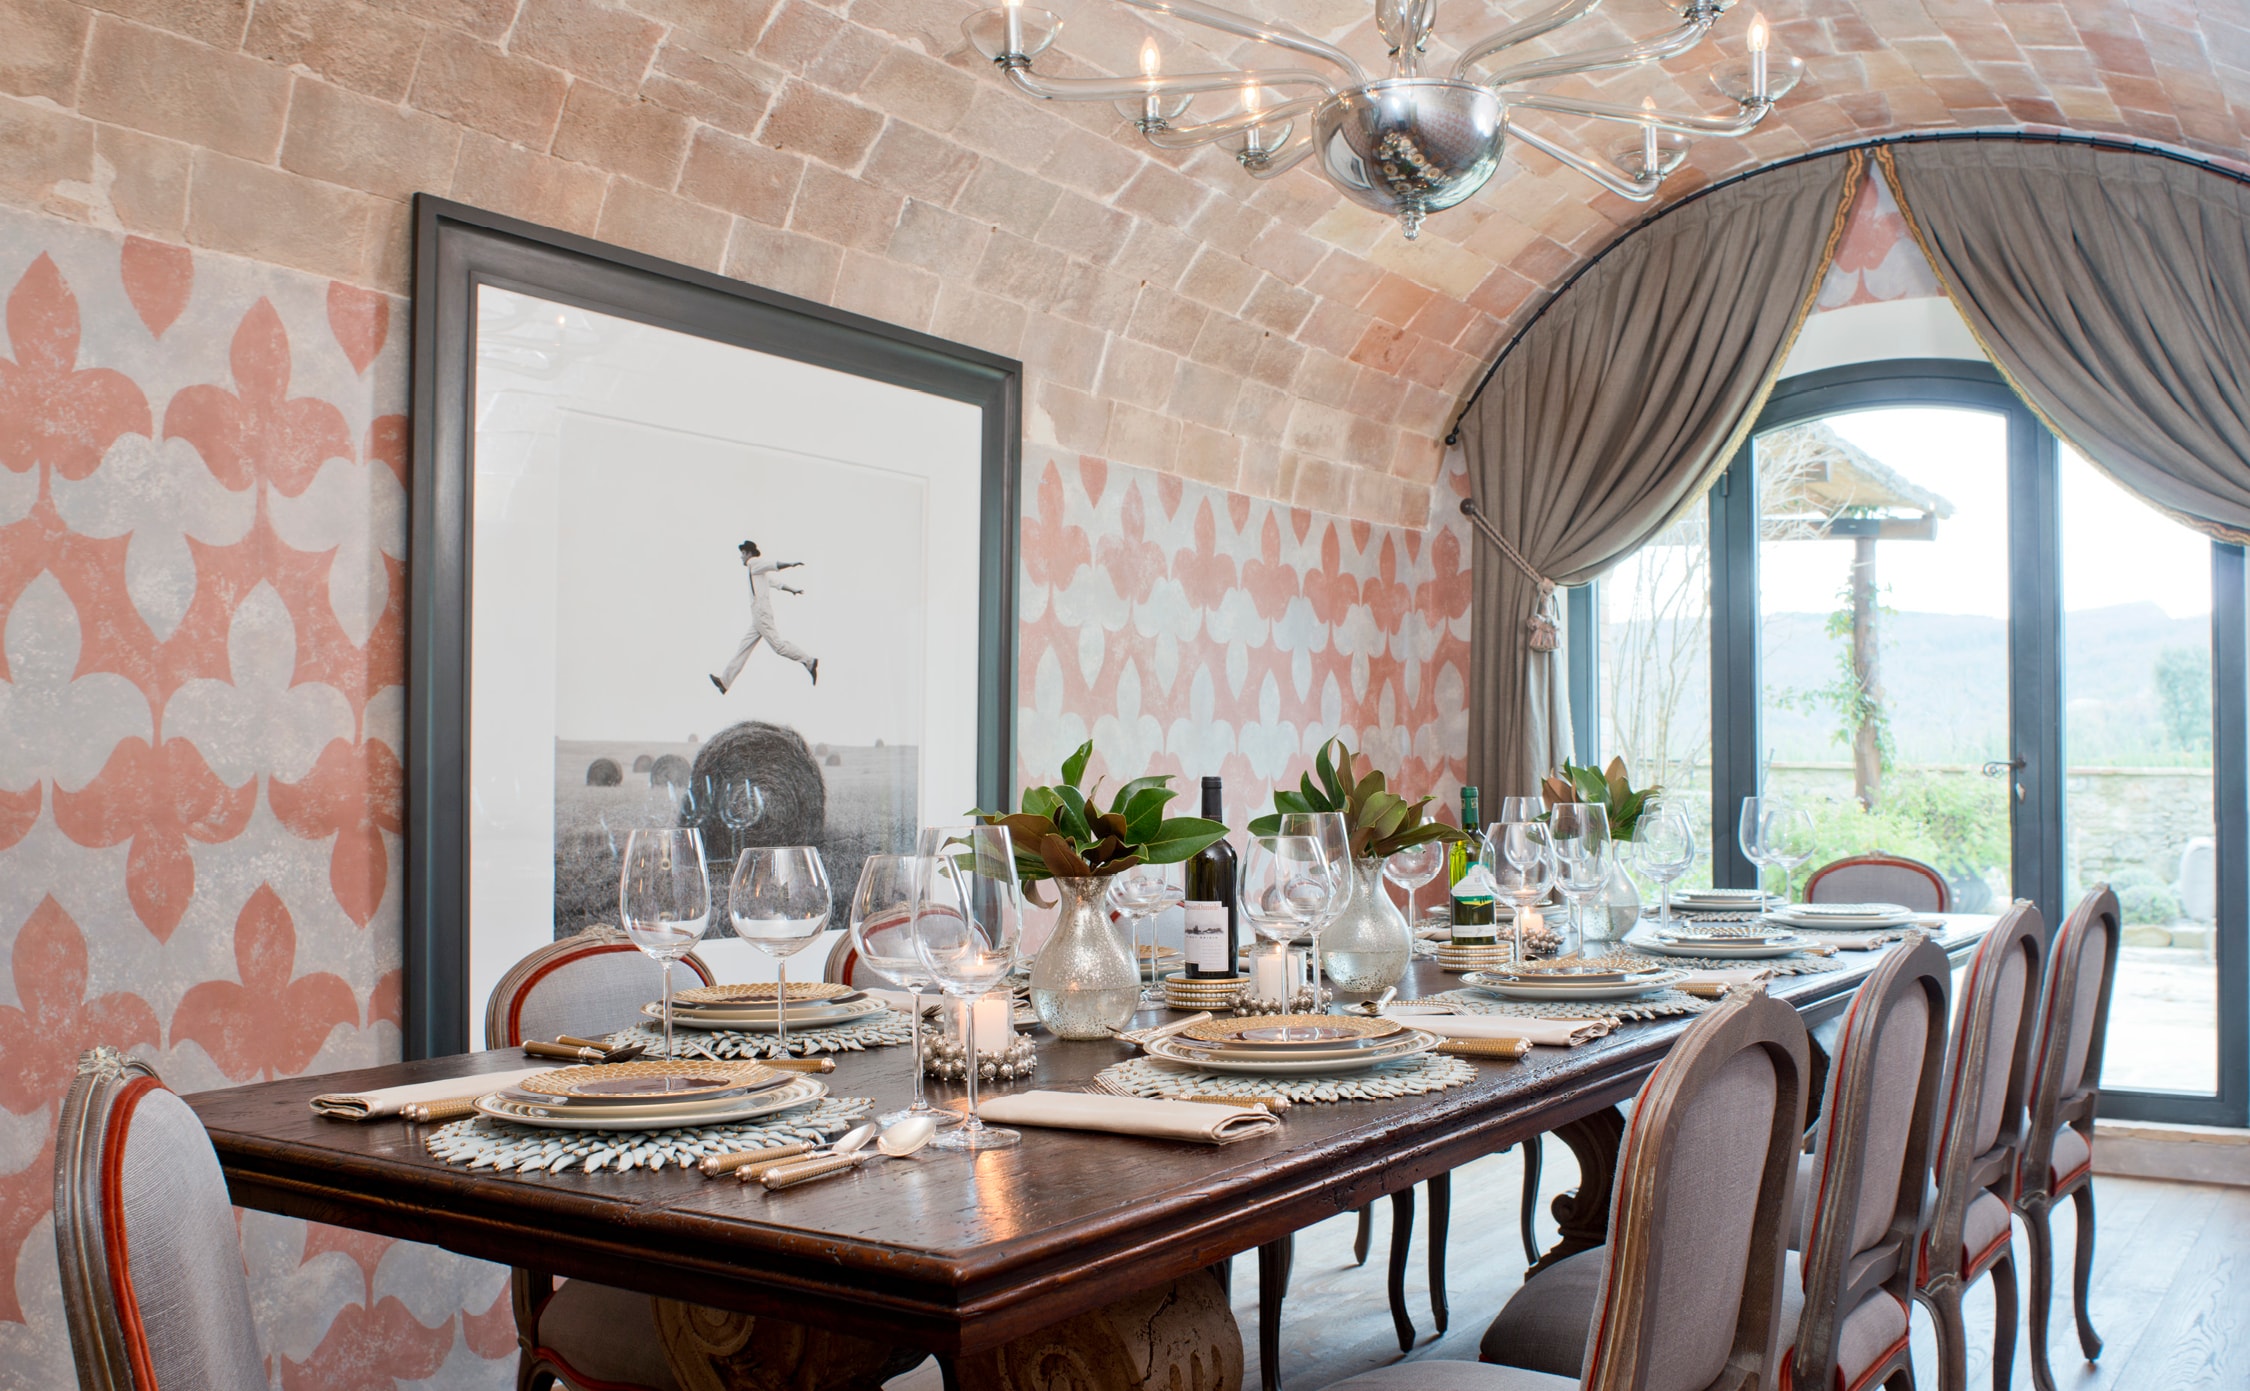 tuscan interior design feels at home in the landscape when it reflects the region's sienna hues